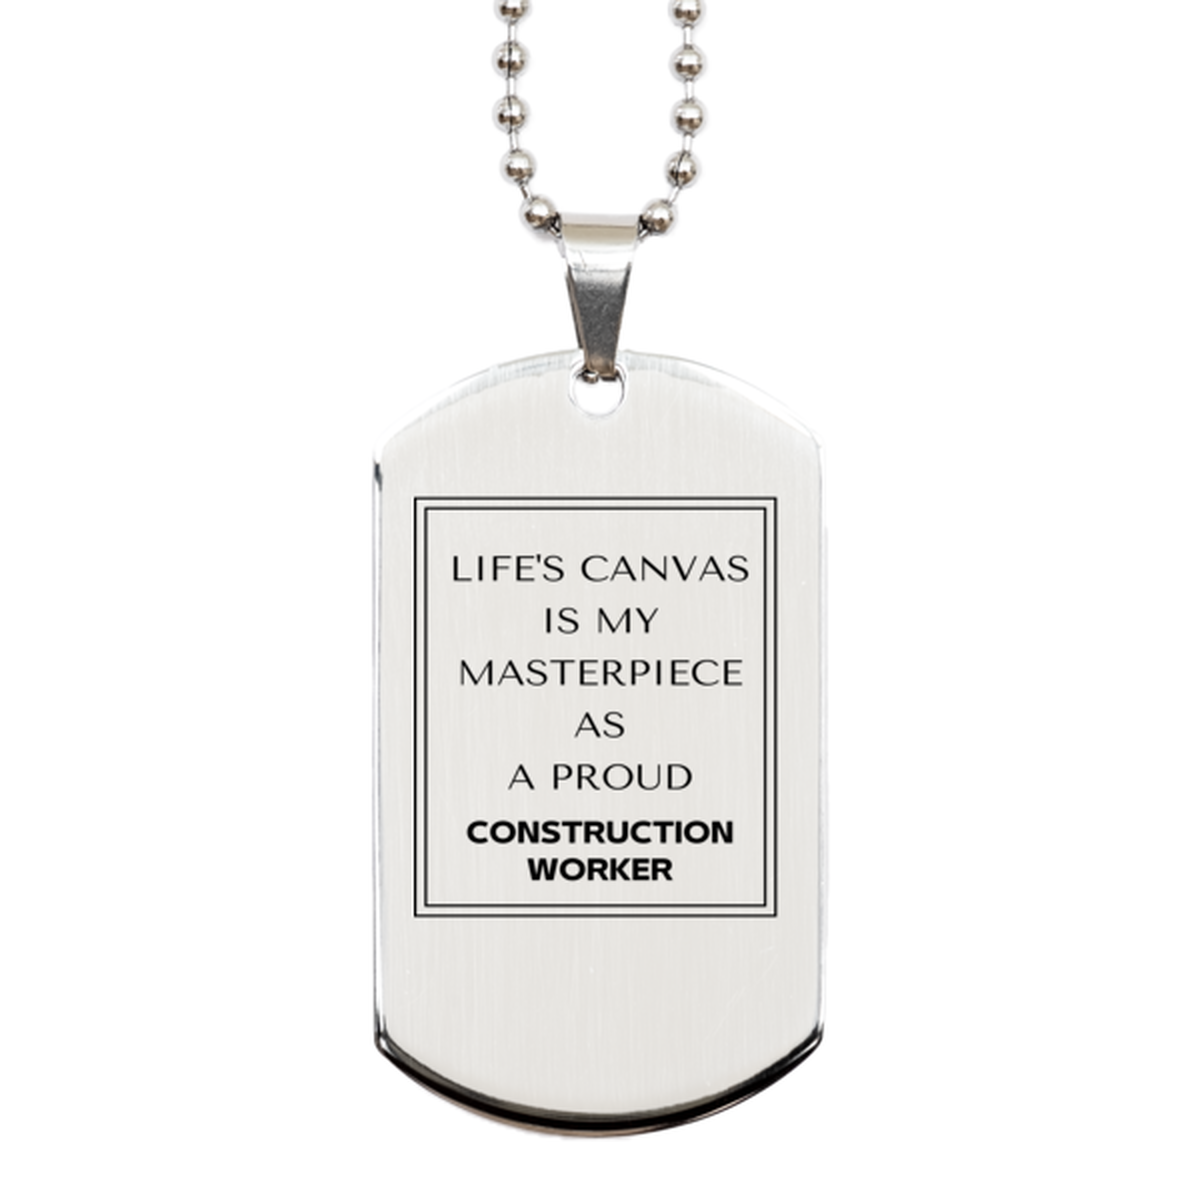 Proud Construction Worker Gifts, Life's canvas is my masterpiece, Epic Birthday Christmas Unique Silver Dog Tag For Construction Worker, Coworkers, Men, Women, Friends